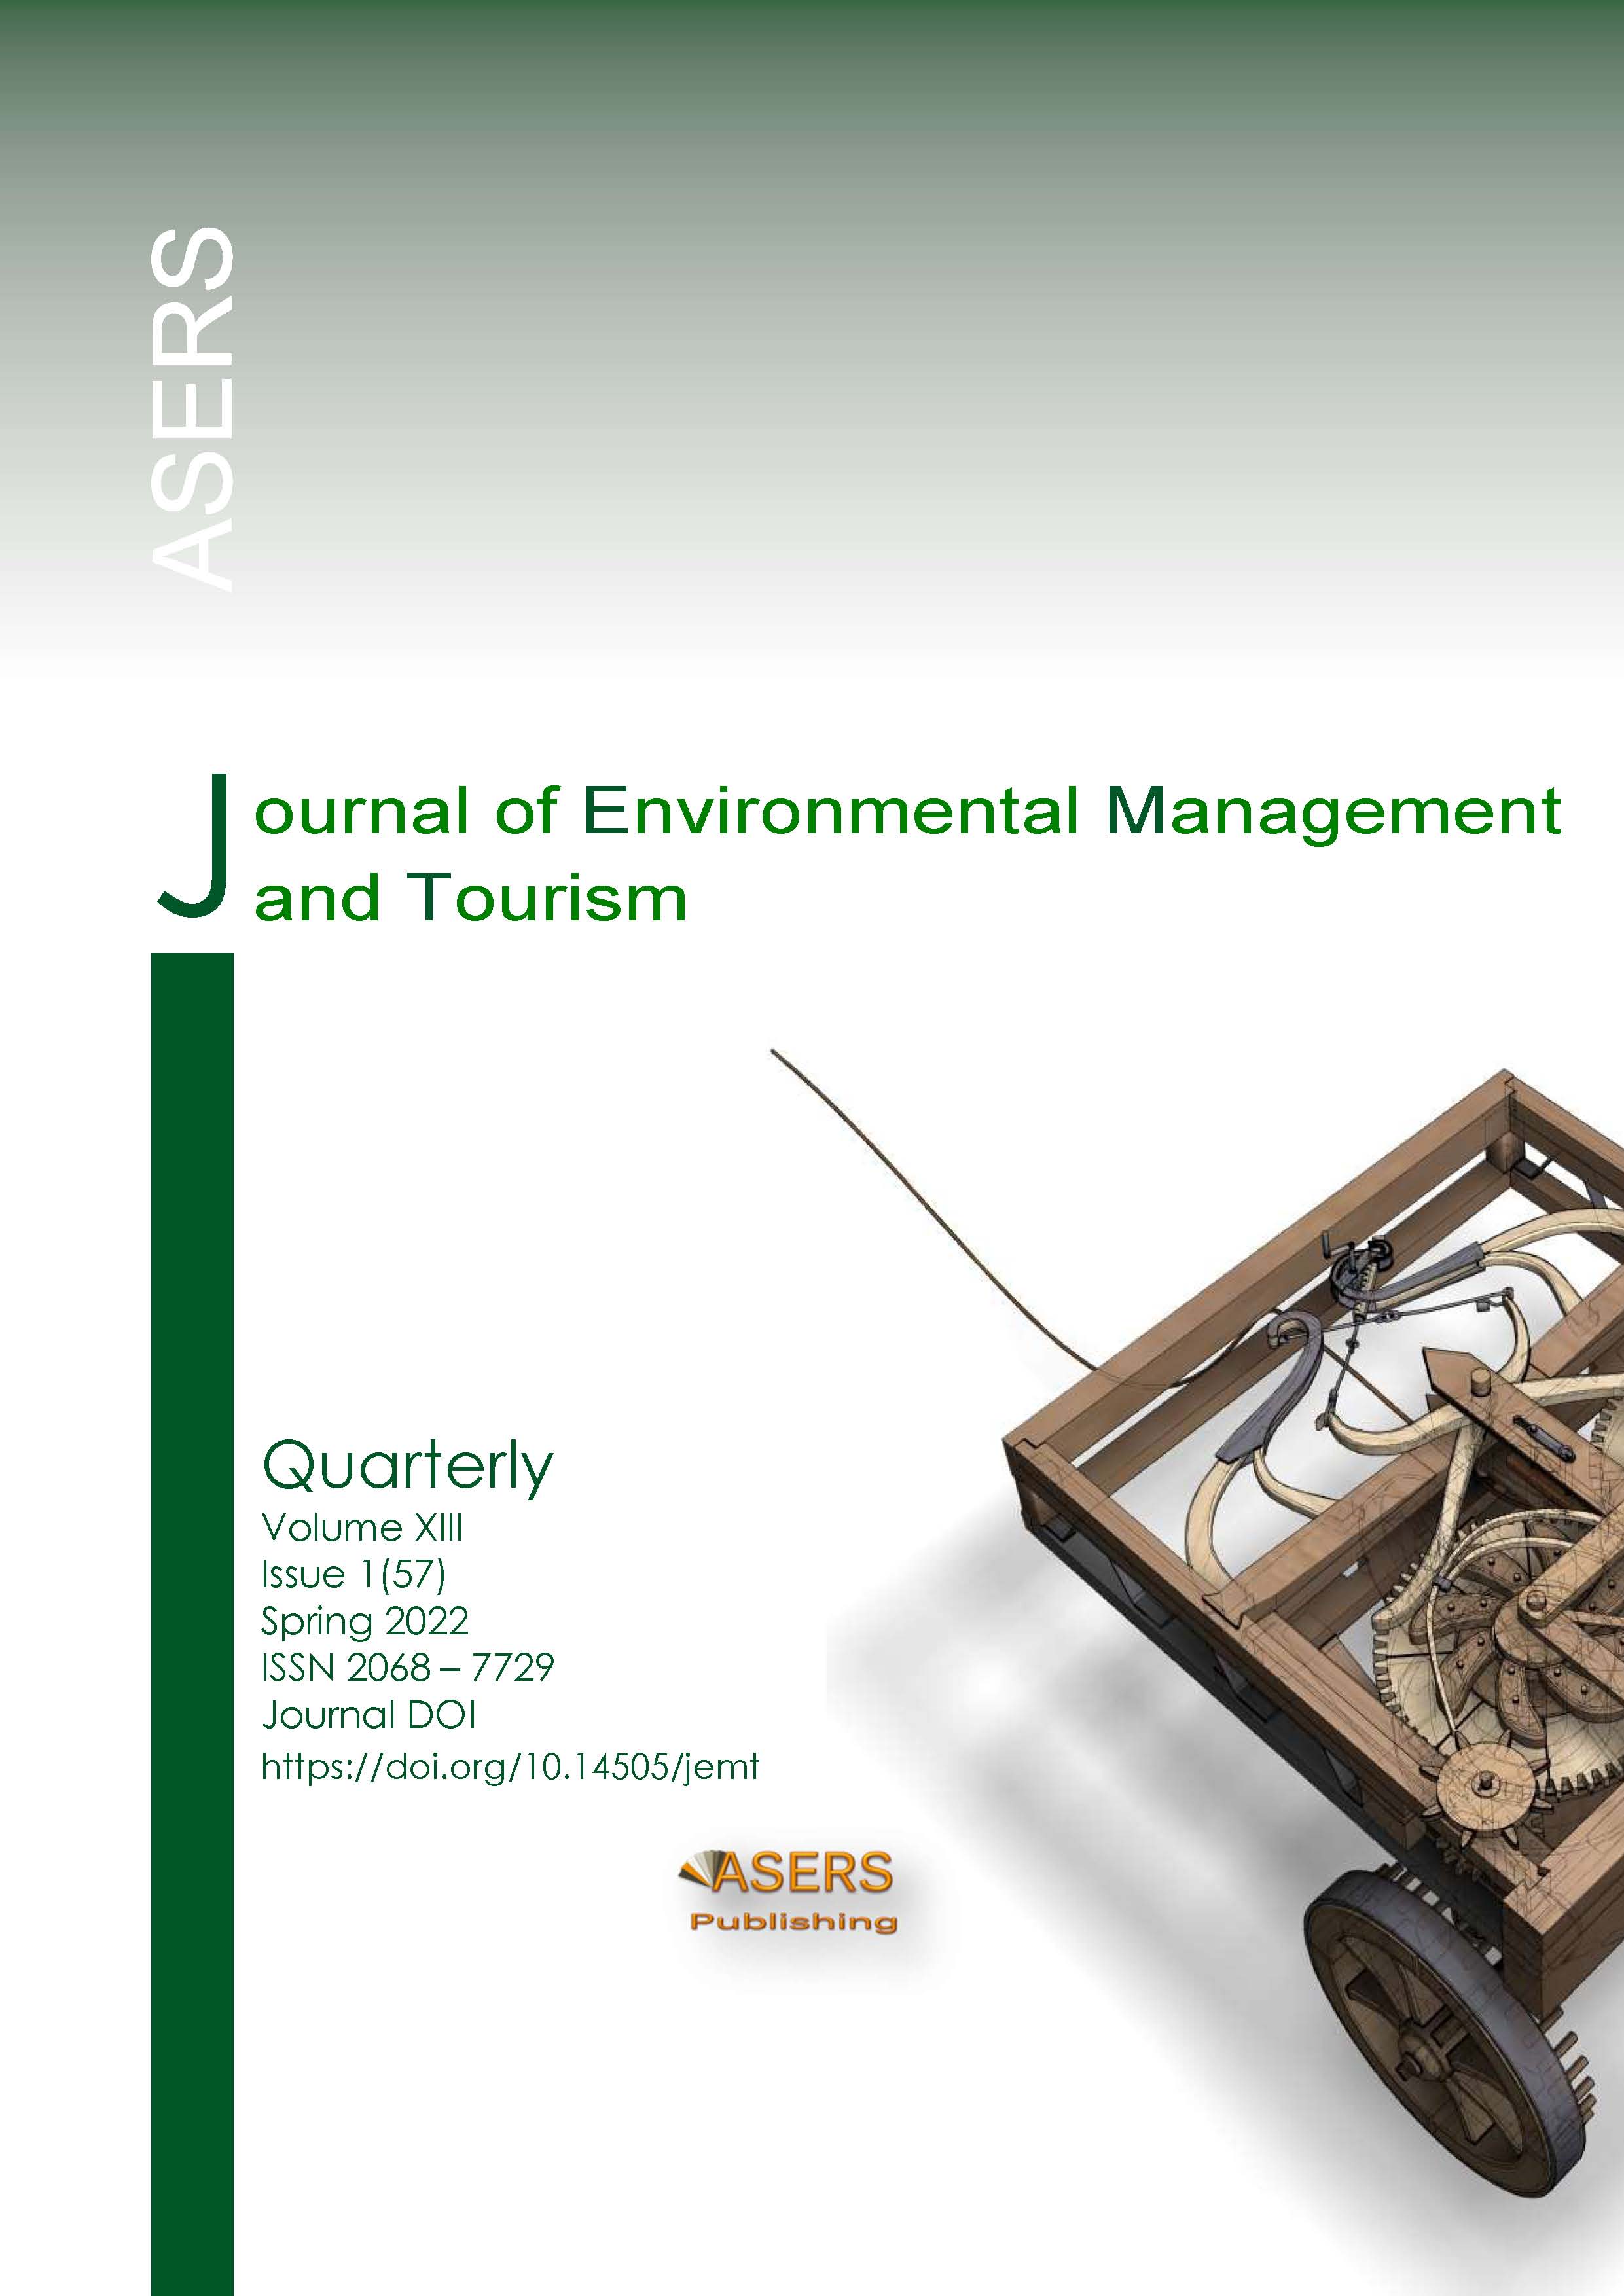 Human Talent and Its Impact on the Quality of Service in the Rural Community-Based Tourism Sector. Analysis and Theoretical Perspectives Cover Image